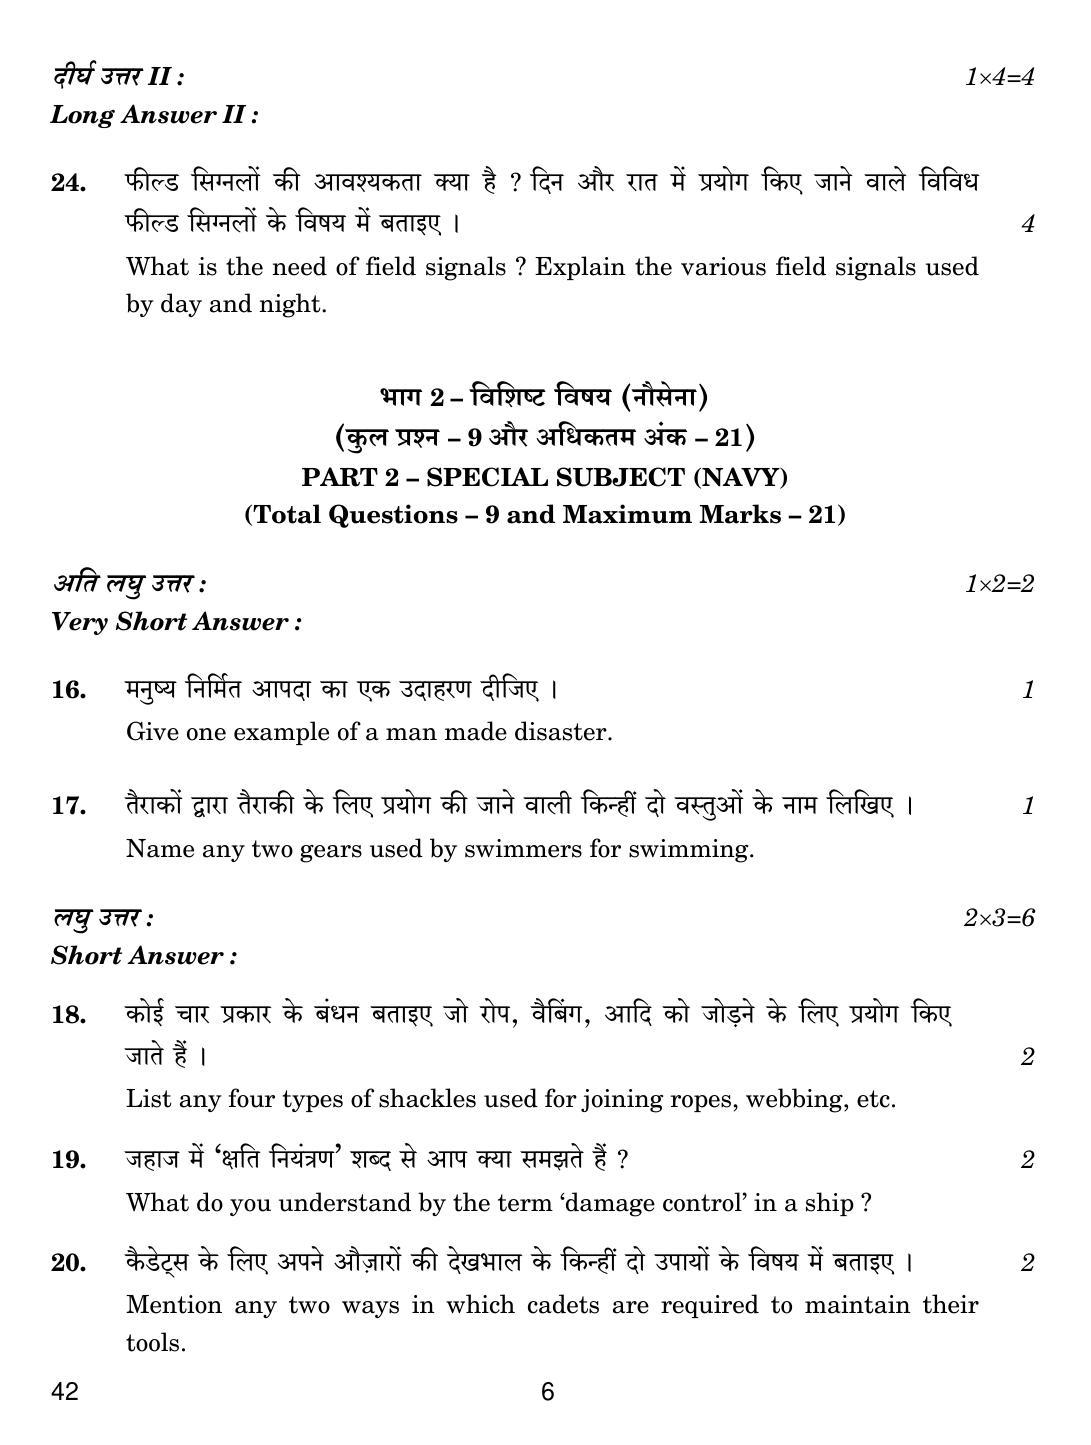 CBSE Class 12 42 National Cadet Corps (NCC) 2019 Question Paper - Page 6